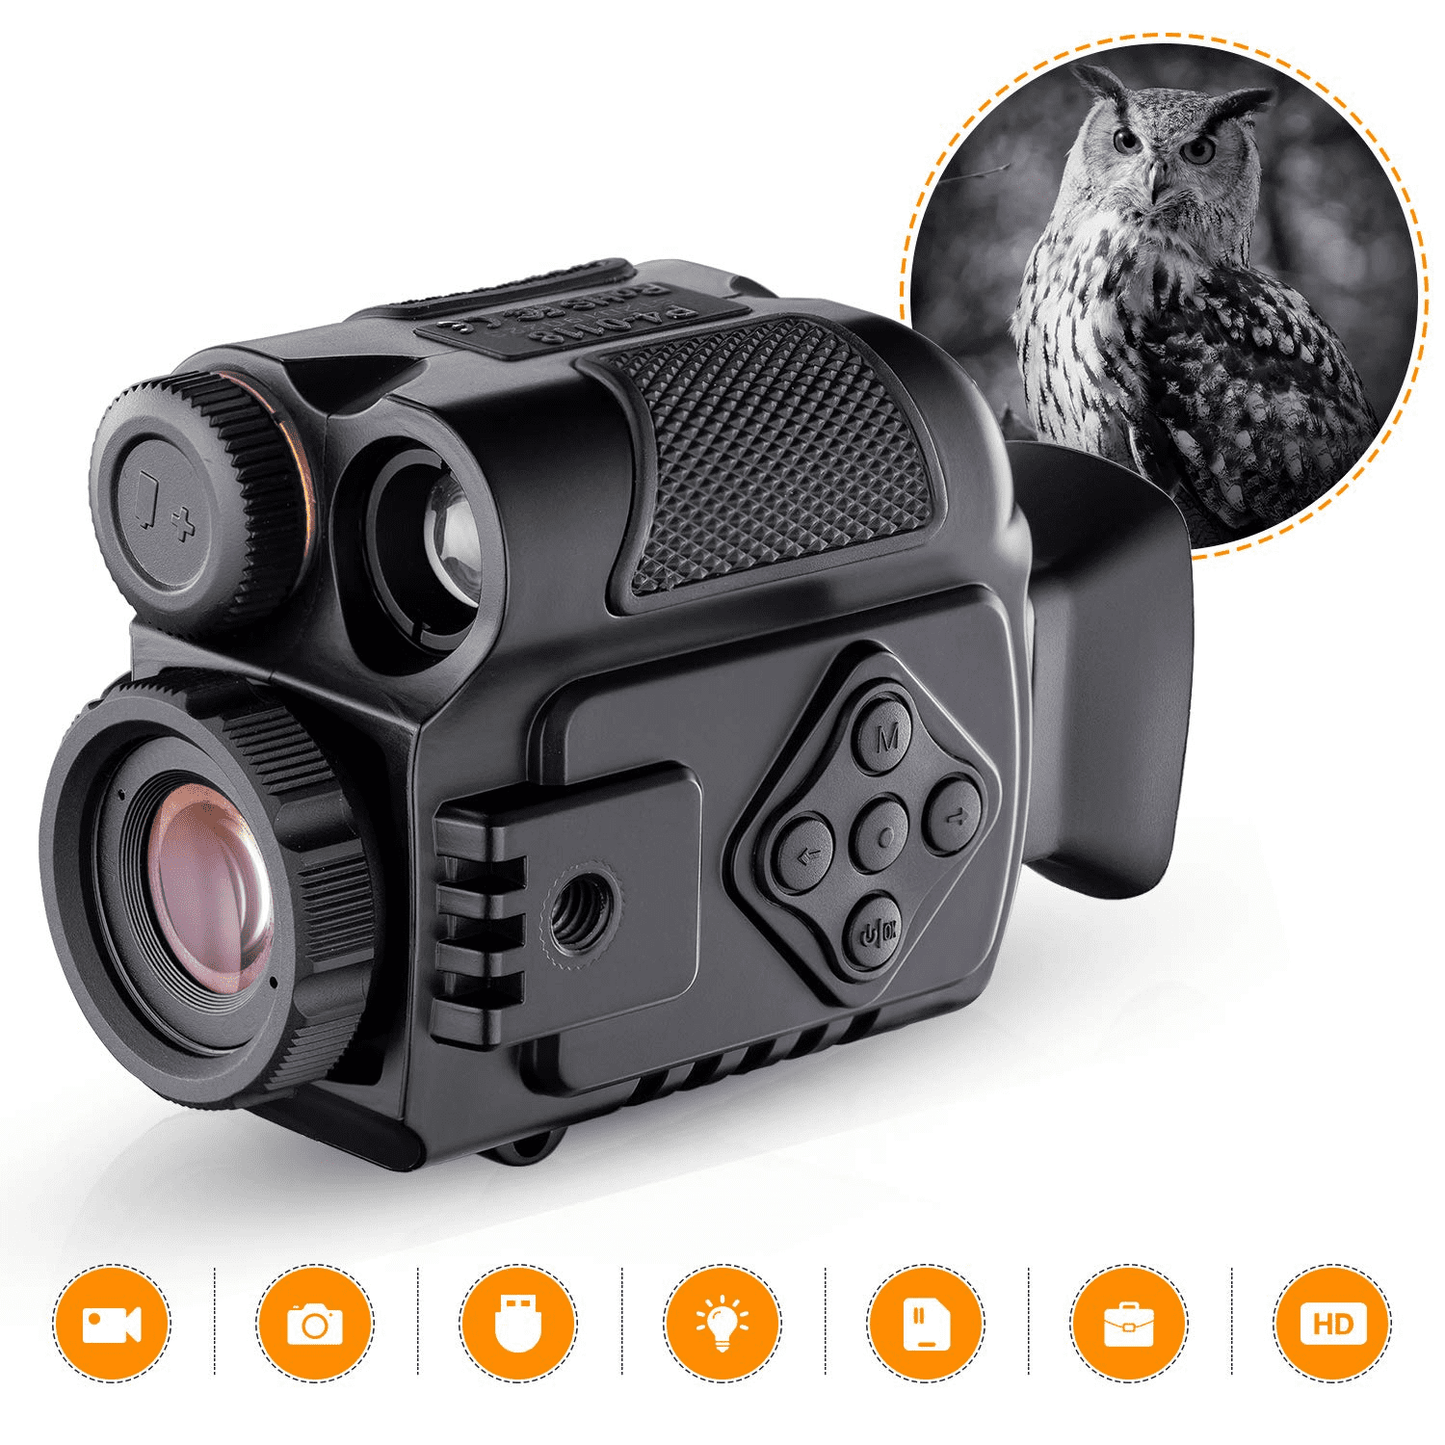 BNISE Digital Night Vision Monocular for 100% Darkness, 1080p Full HD Photo & Video 5X Night Vision Goggles Portable Infrared Night Vision for Day & Night Hunting, Camping, Surveillance with 8GB Card